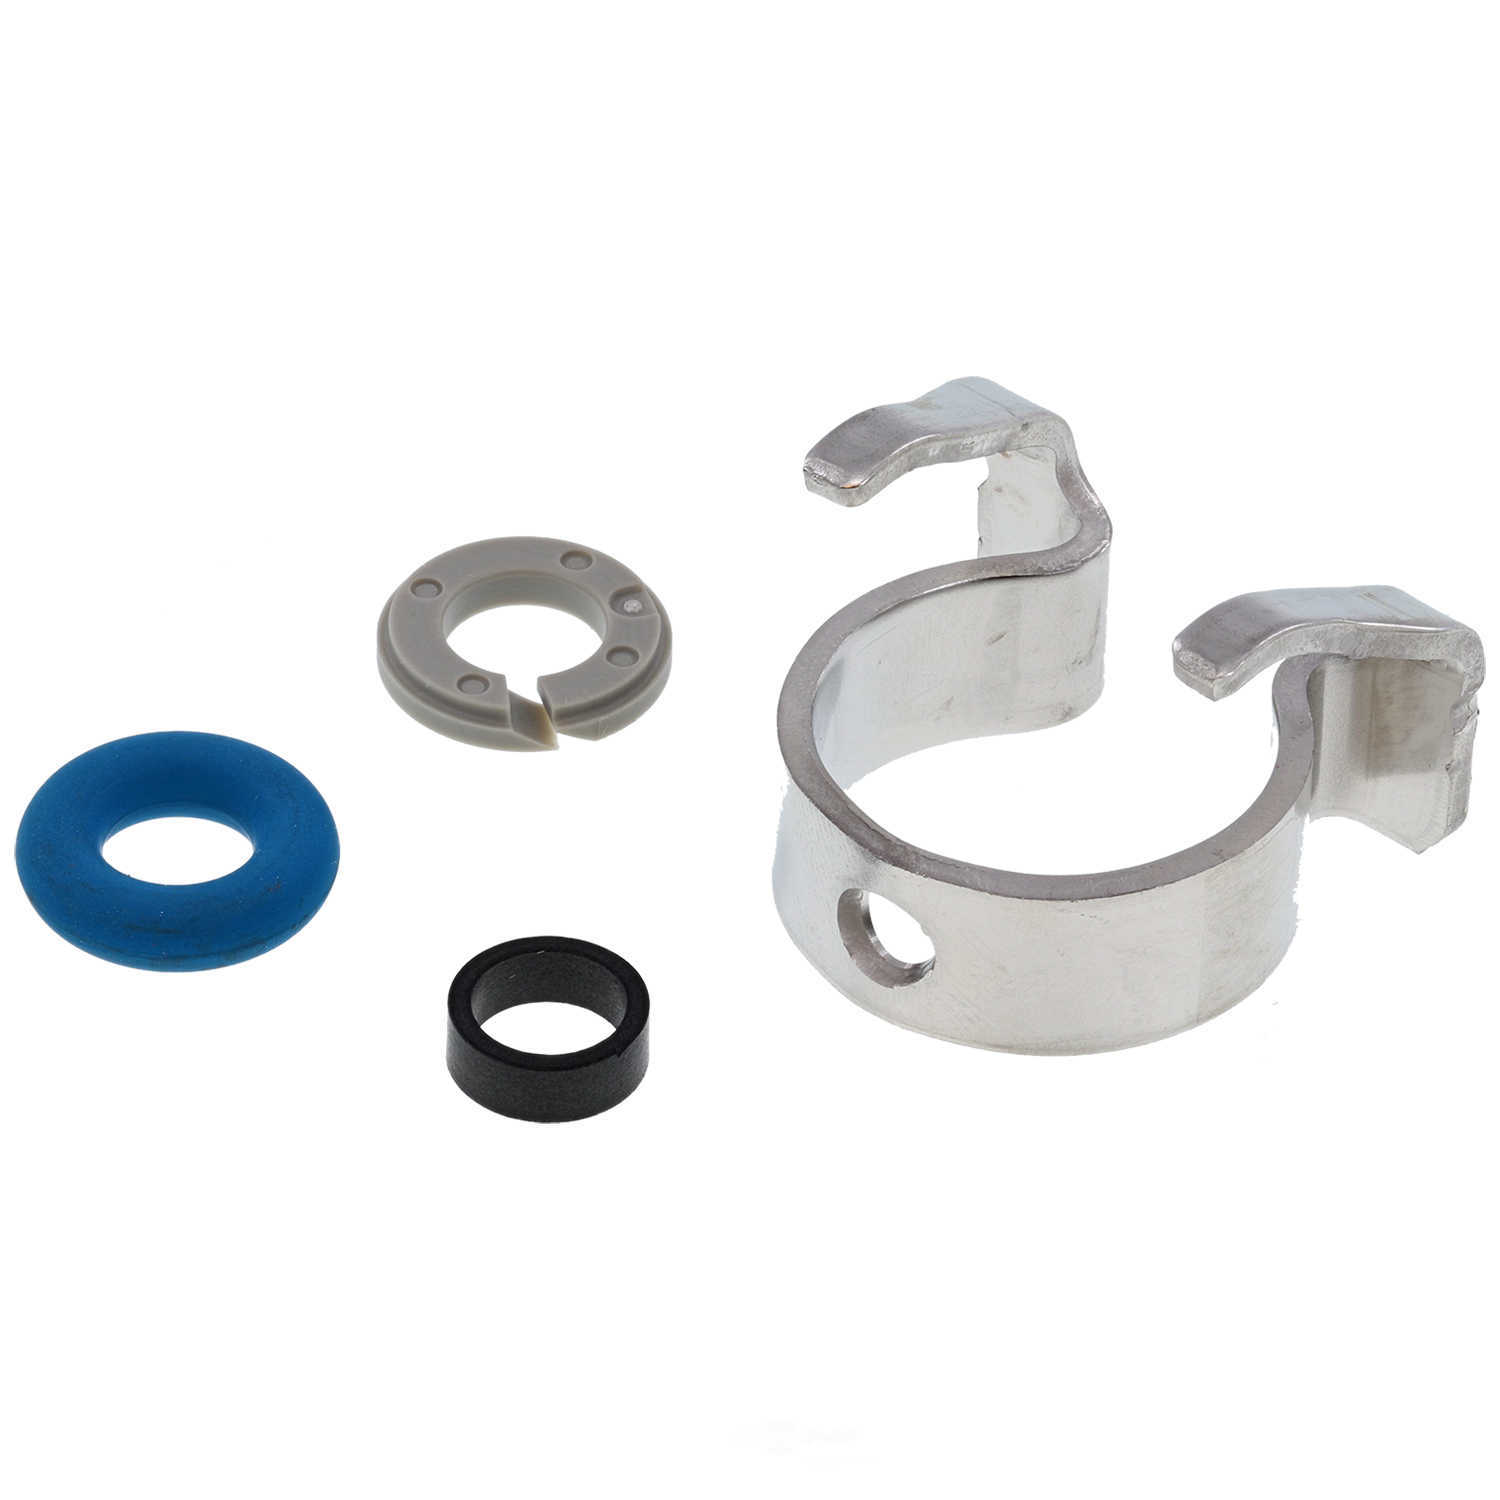 GB REMANUFACTURING INC. - Fuel Injector Seal Kit - GBR 8-079